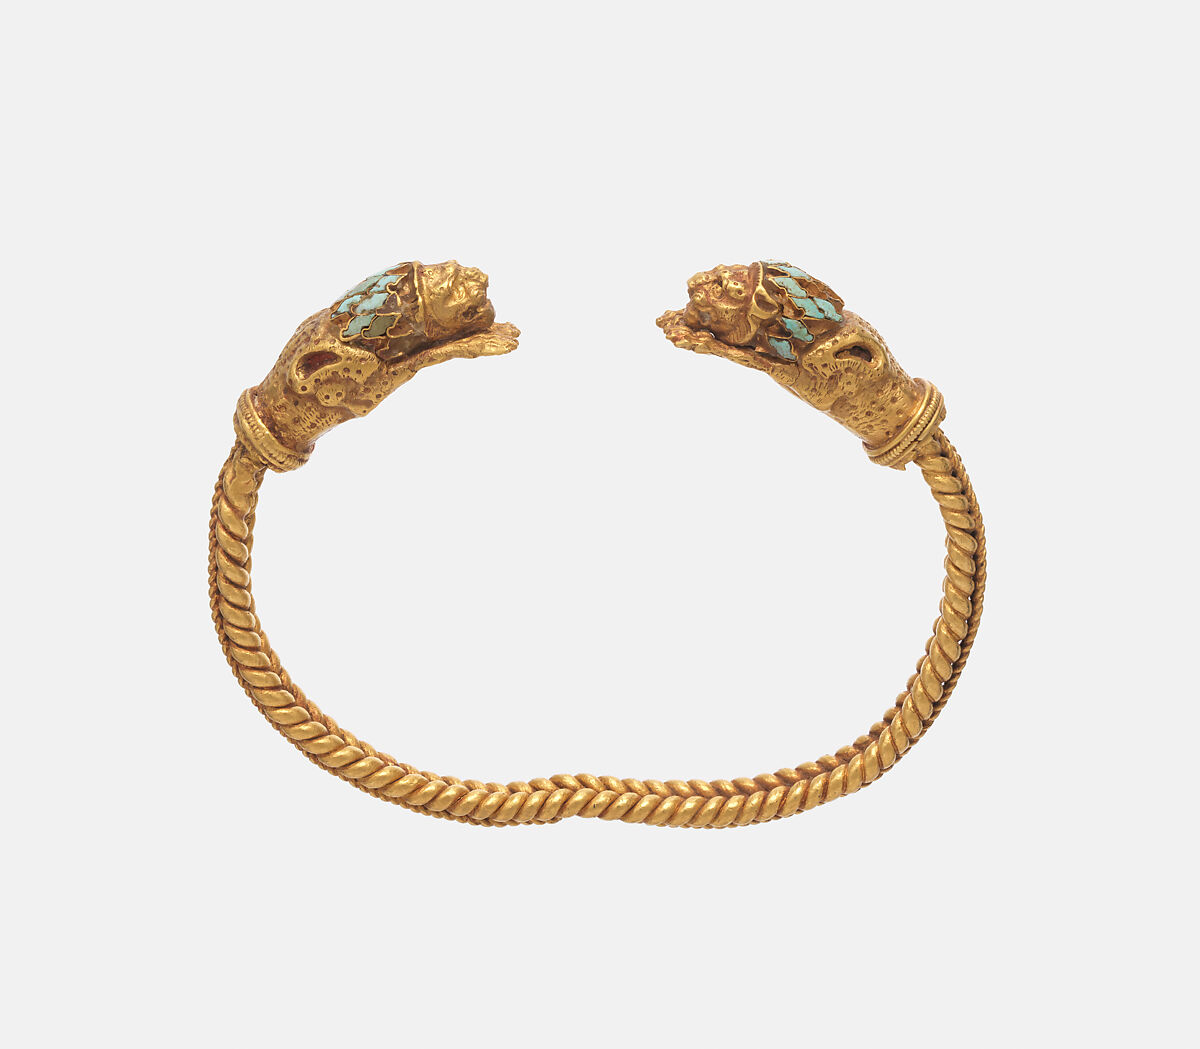 Bracelet with terminals in form of lion foreparts, Gold, glass, cinnabar, Iran 